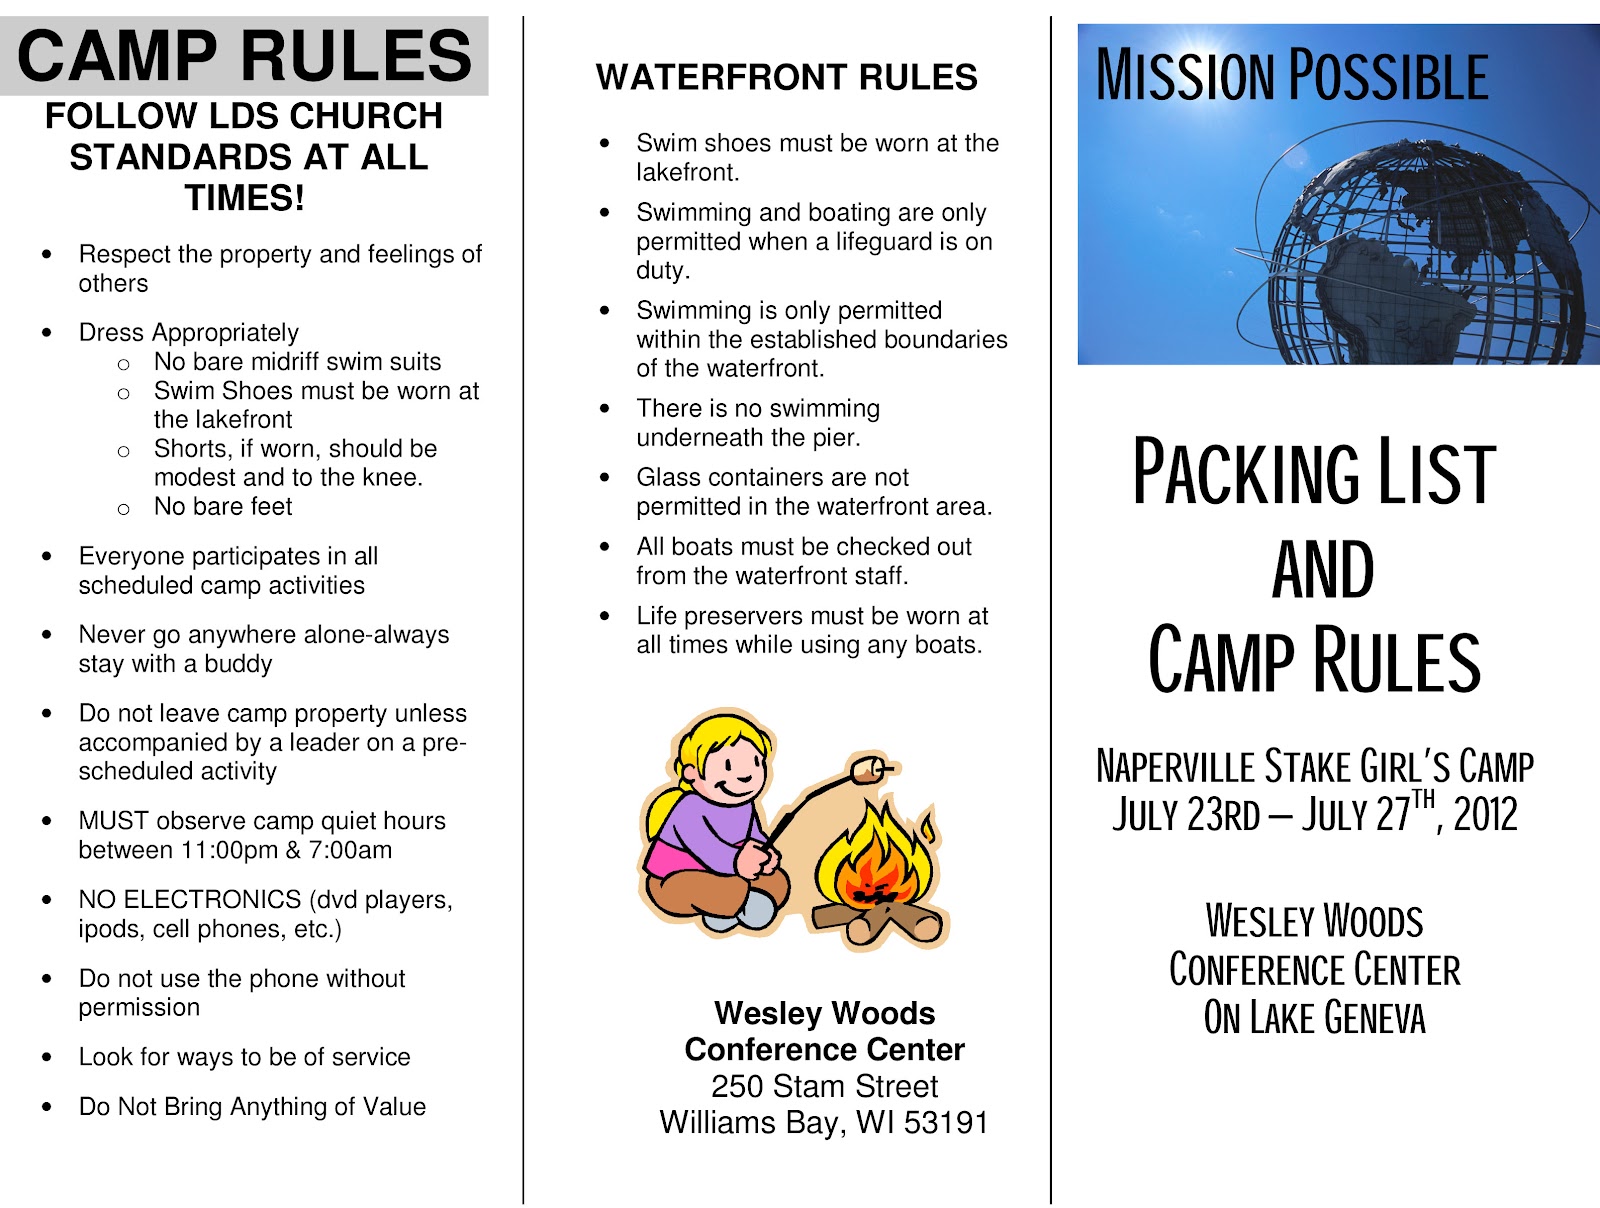 Camp rules. Camping Rules. Campsite Rules правила. Camp Rules list. Camp Rules for Kids.